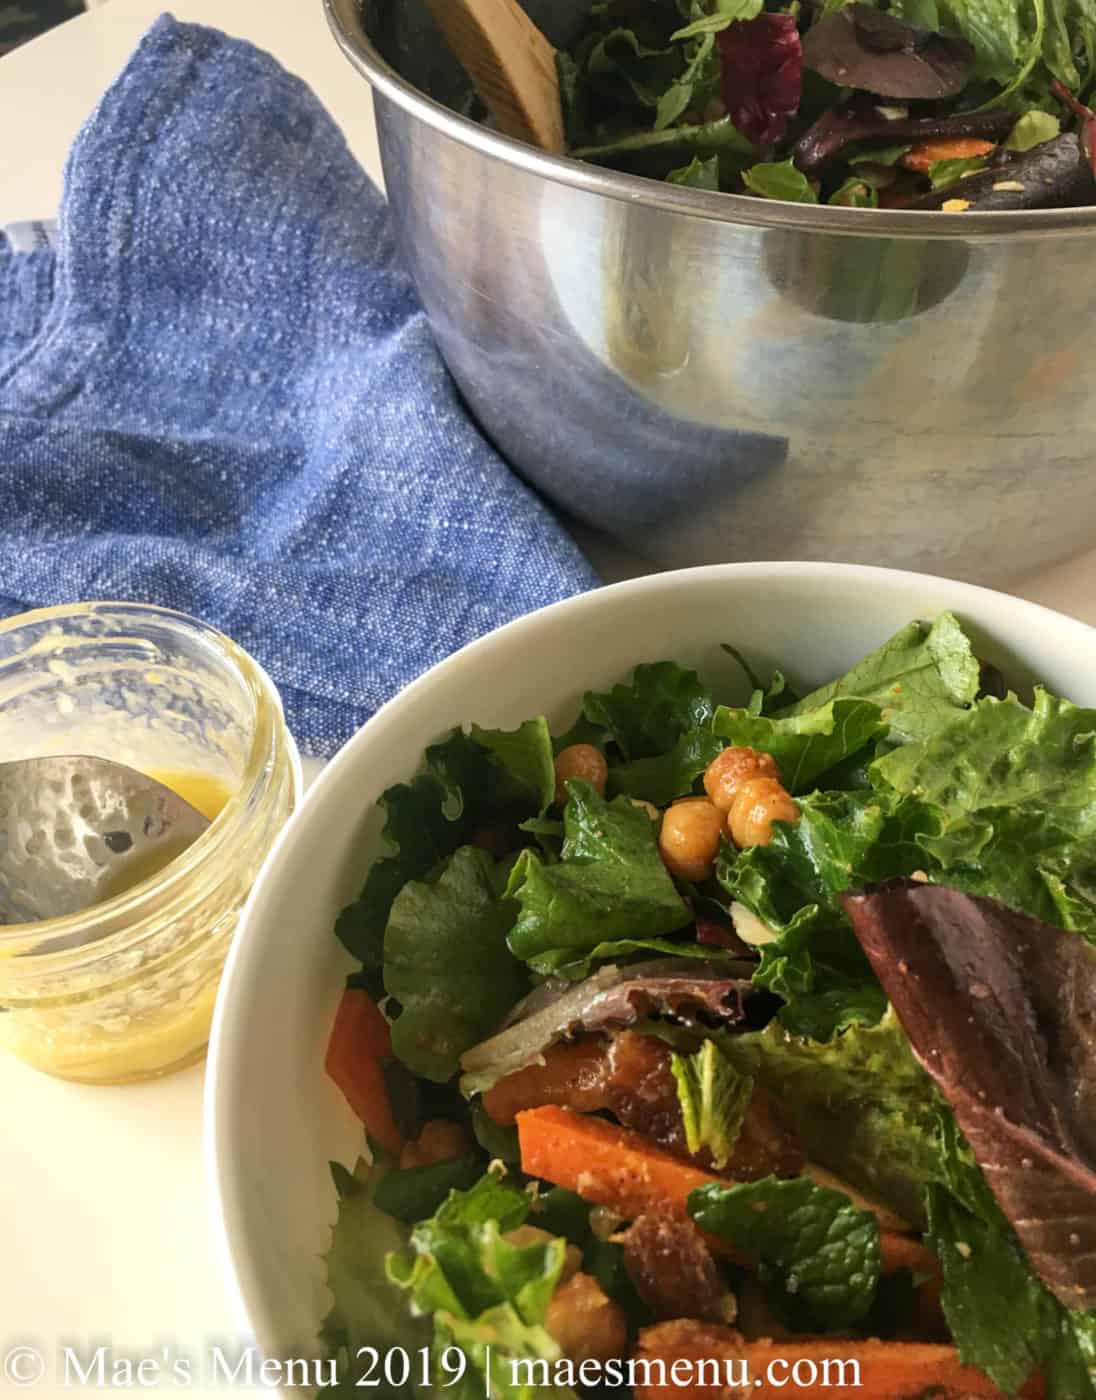 White salad bowl with green salad, chickpeas, and carrots in the foreground. Clear cup of vinaigrette and a spoon to the left of the bowl and a large metal bowl with the rest of salad behind that. Blue dishcloth in the back left of the photo.